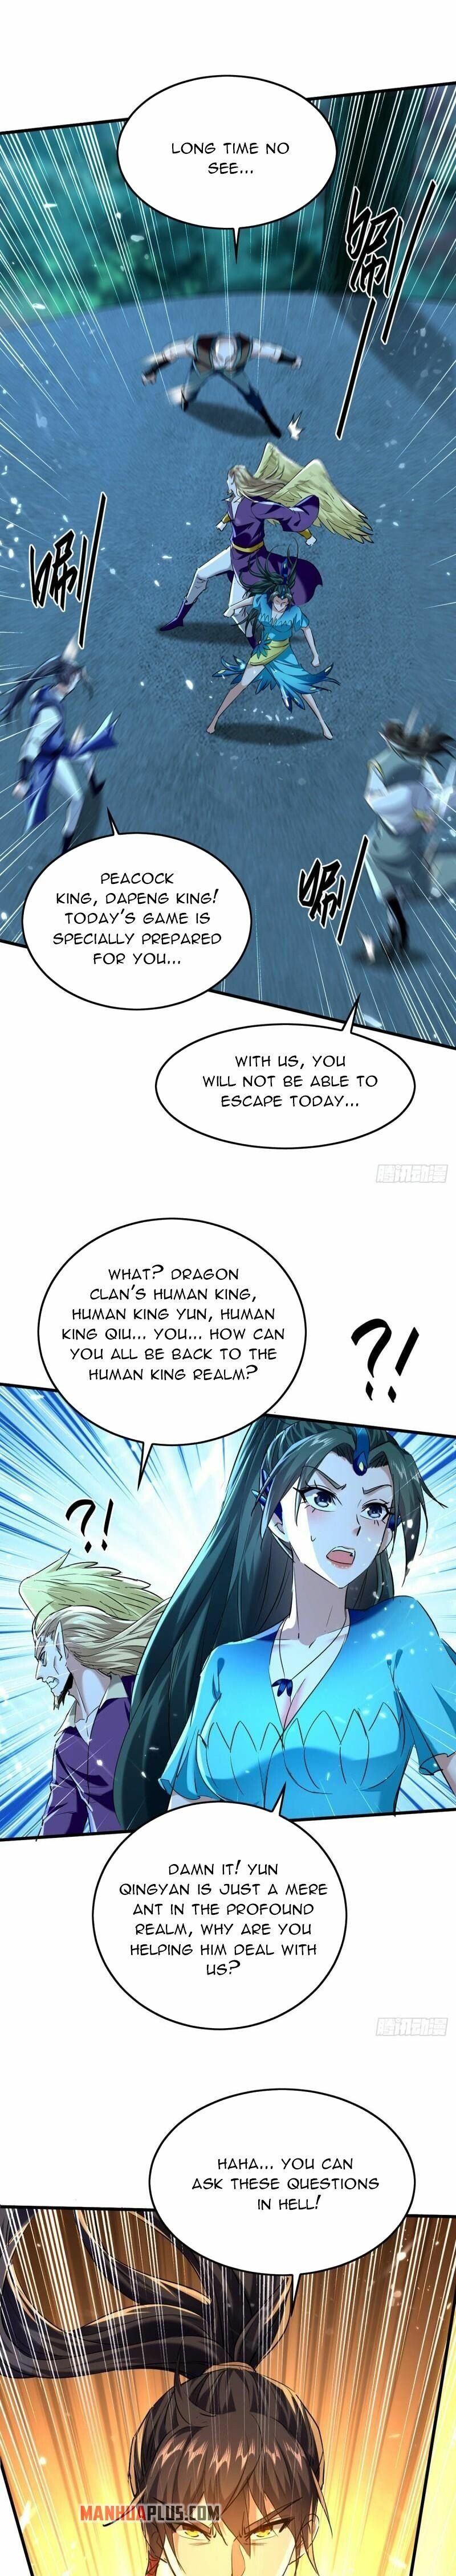 Return of Immortal Emperor Chapter 319 page 10